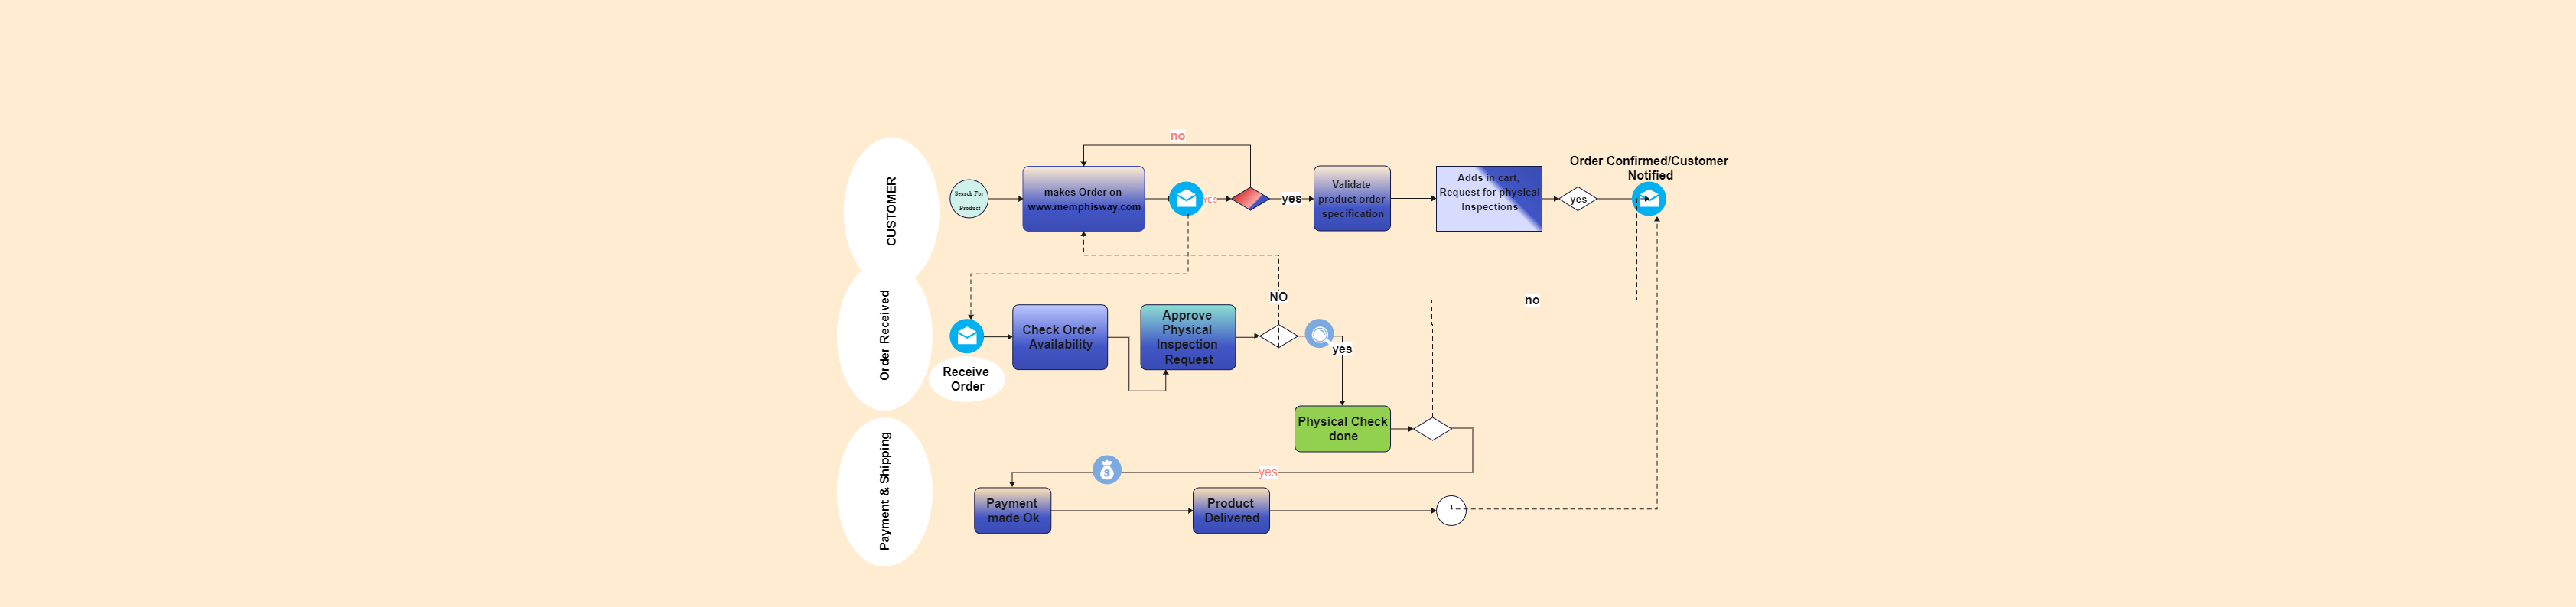 The swimlane diagram below shows the entire process when a customer visits a website (memphisway.com) to place a particular order. Swim lane diagrams are flowcharts that show both a process from start to finish and who is responsible for each step. Much l